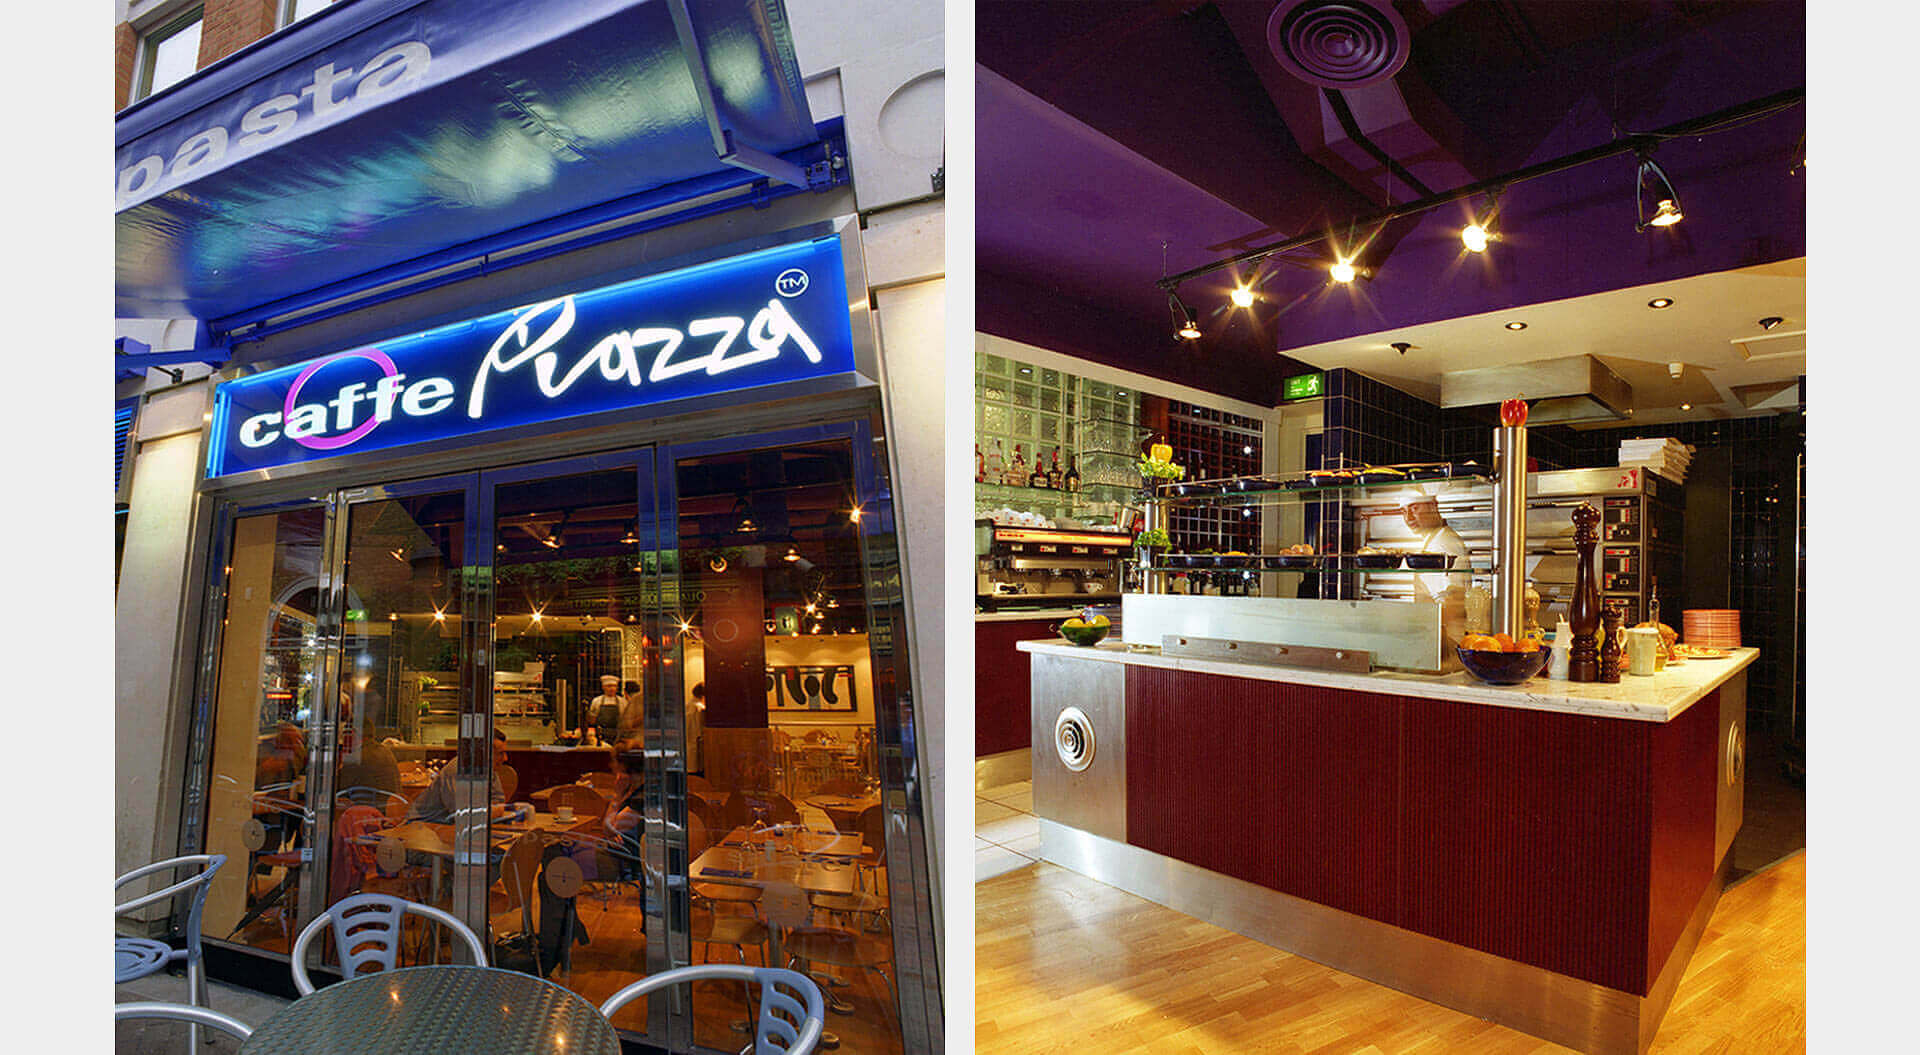 Caffe Piazza restaurant branding external seating and Chef's pizza preparation table and oven interior design 